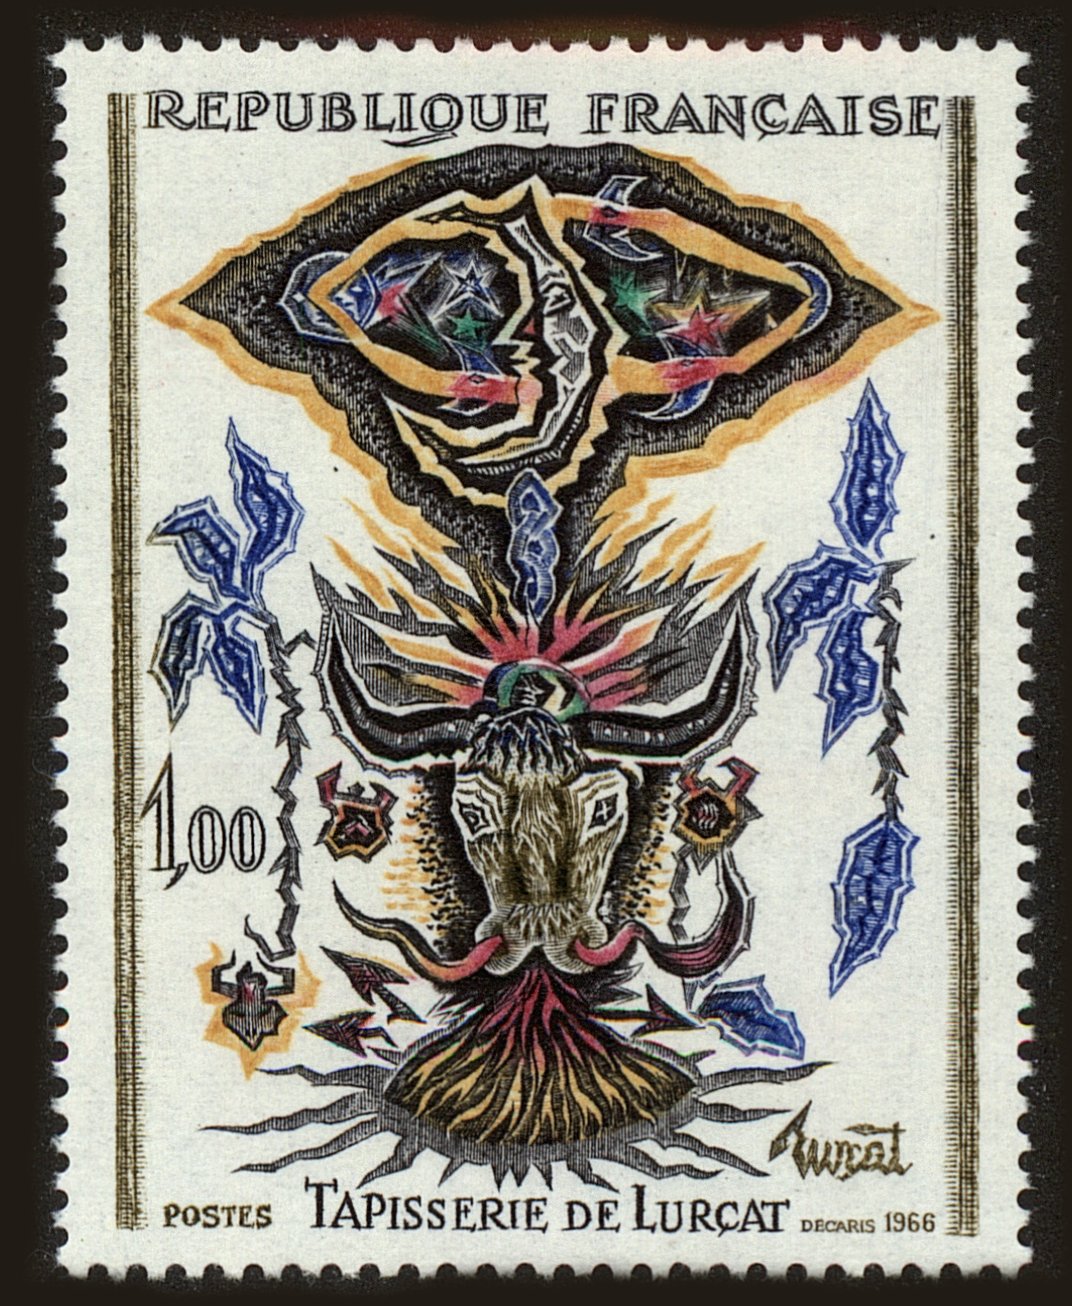 Front view of France 1152 collectors stamp